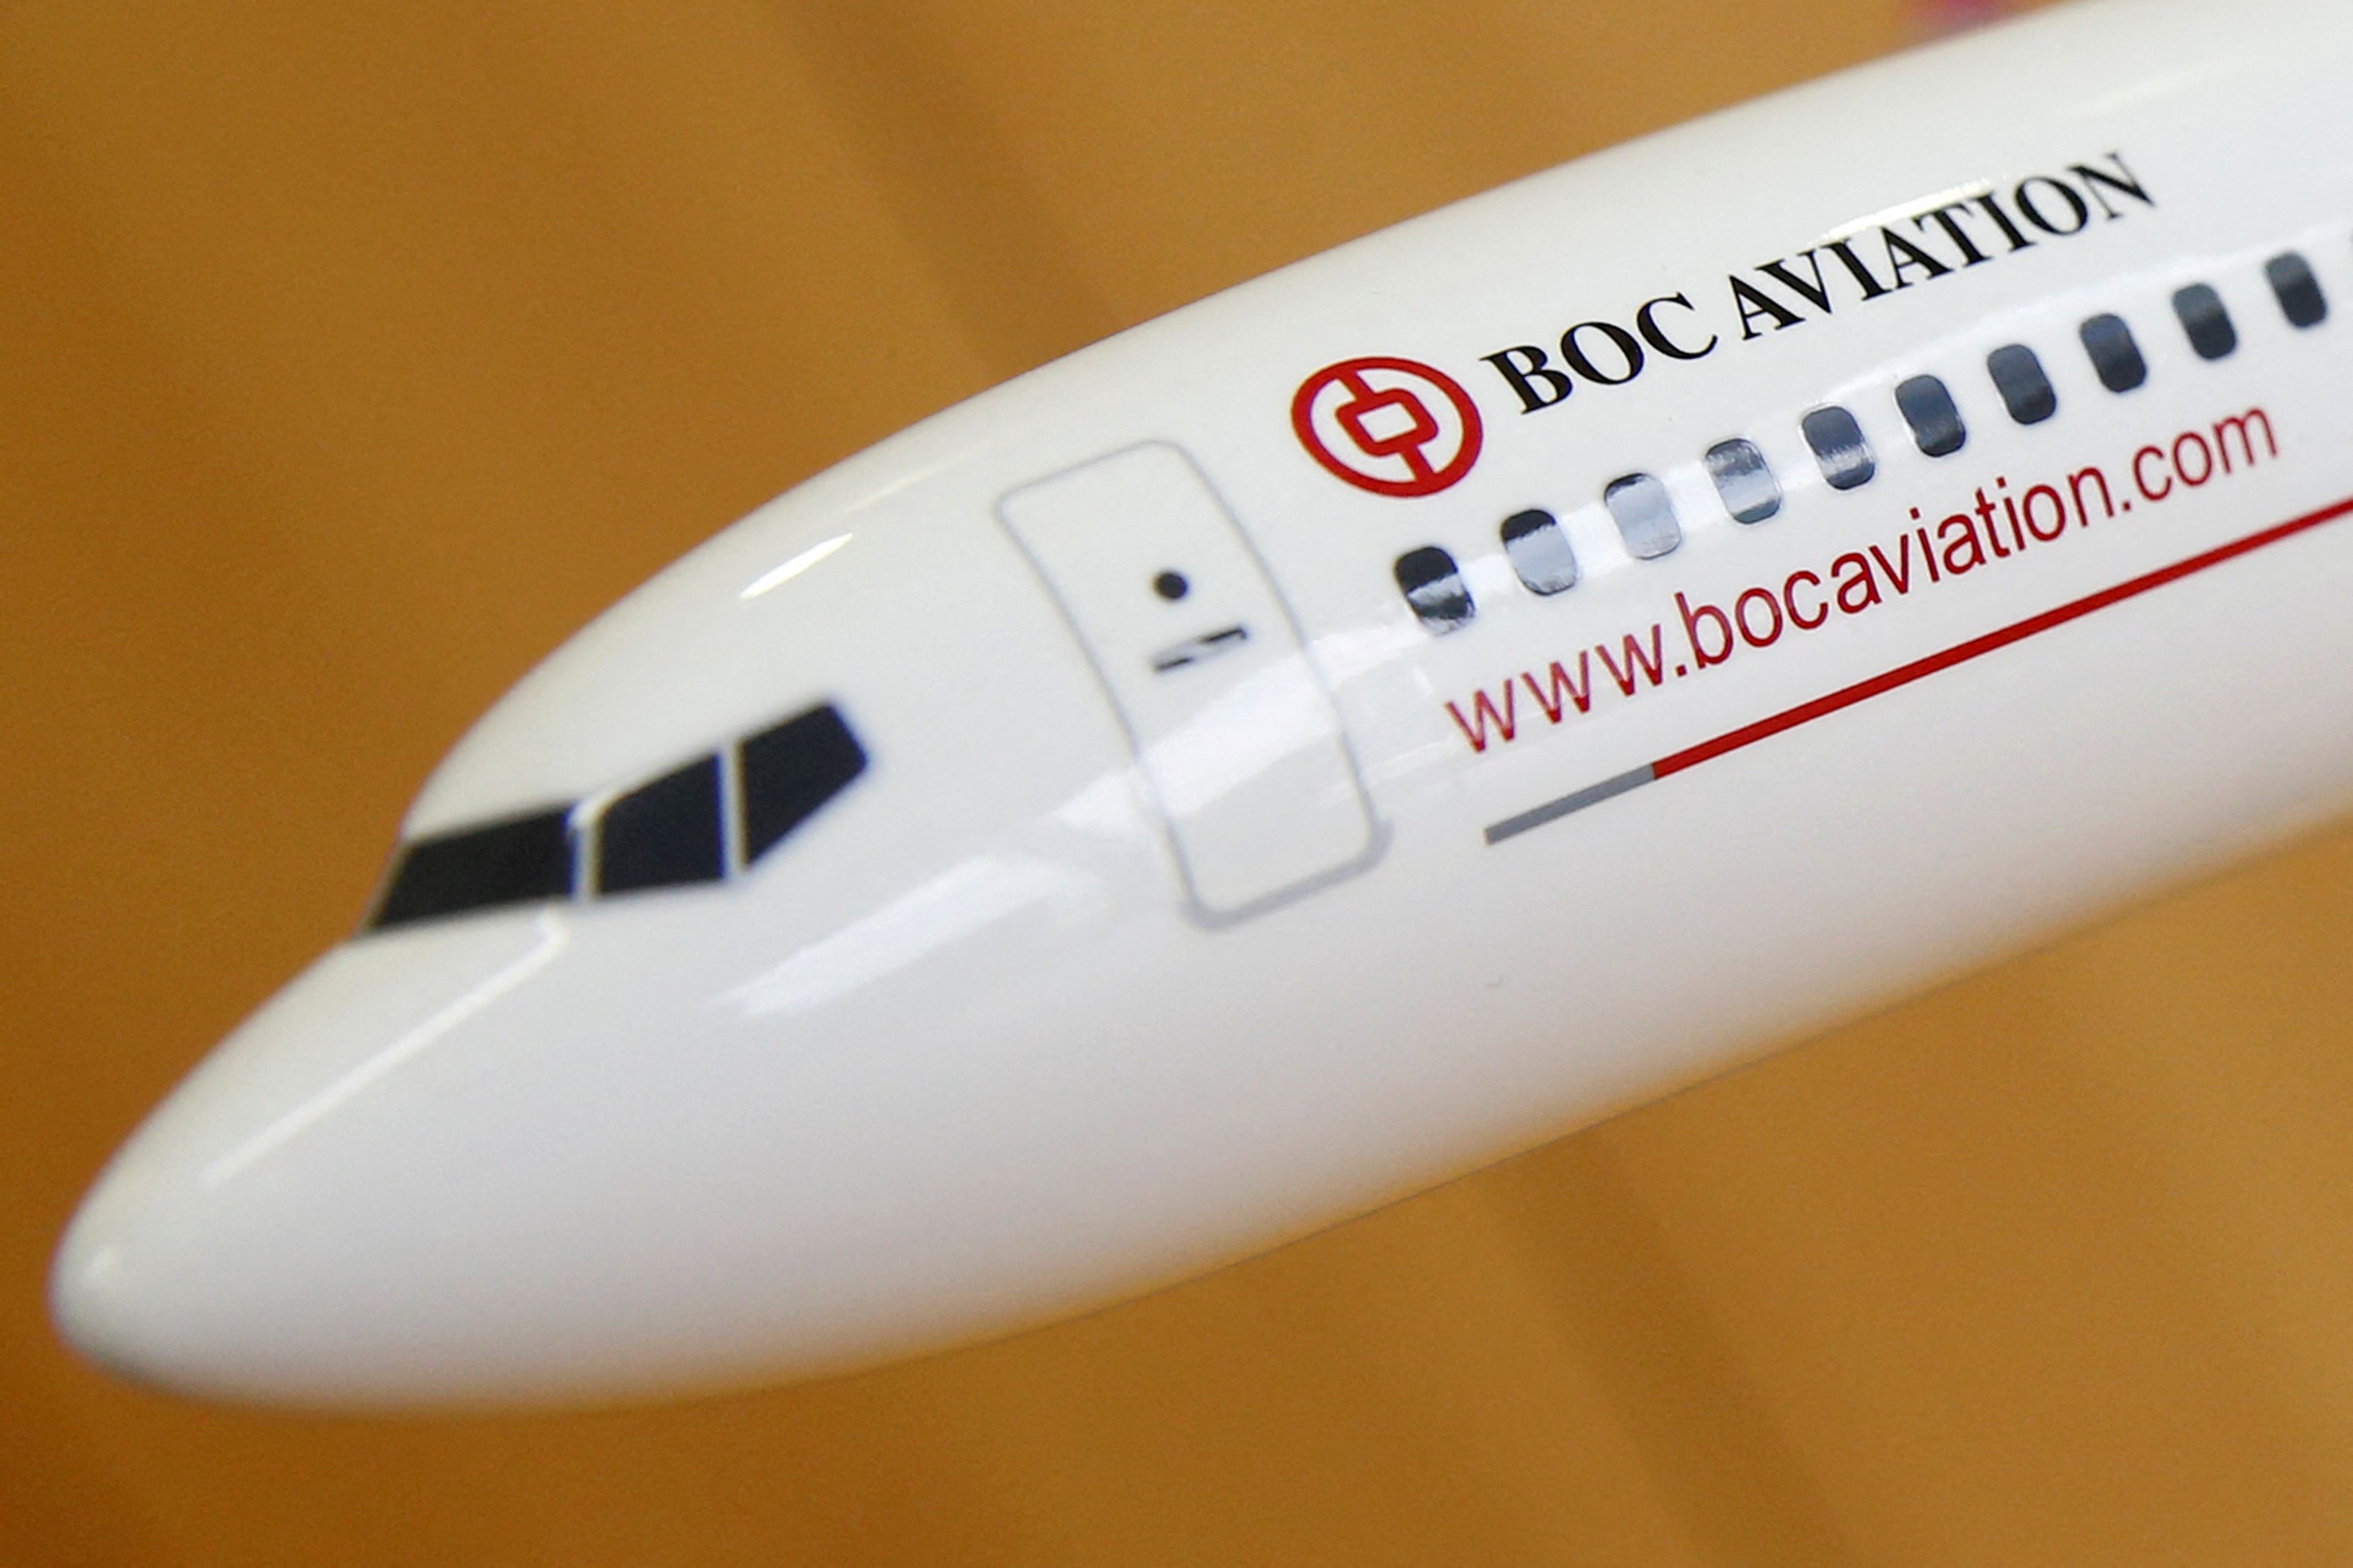 A photo illustration of a BoC Aviation model plane at their office in Singapore